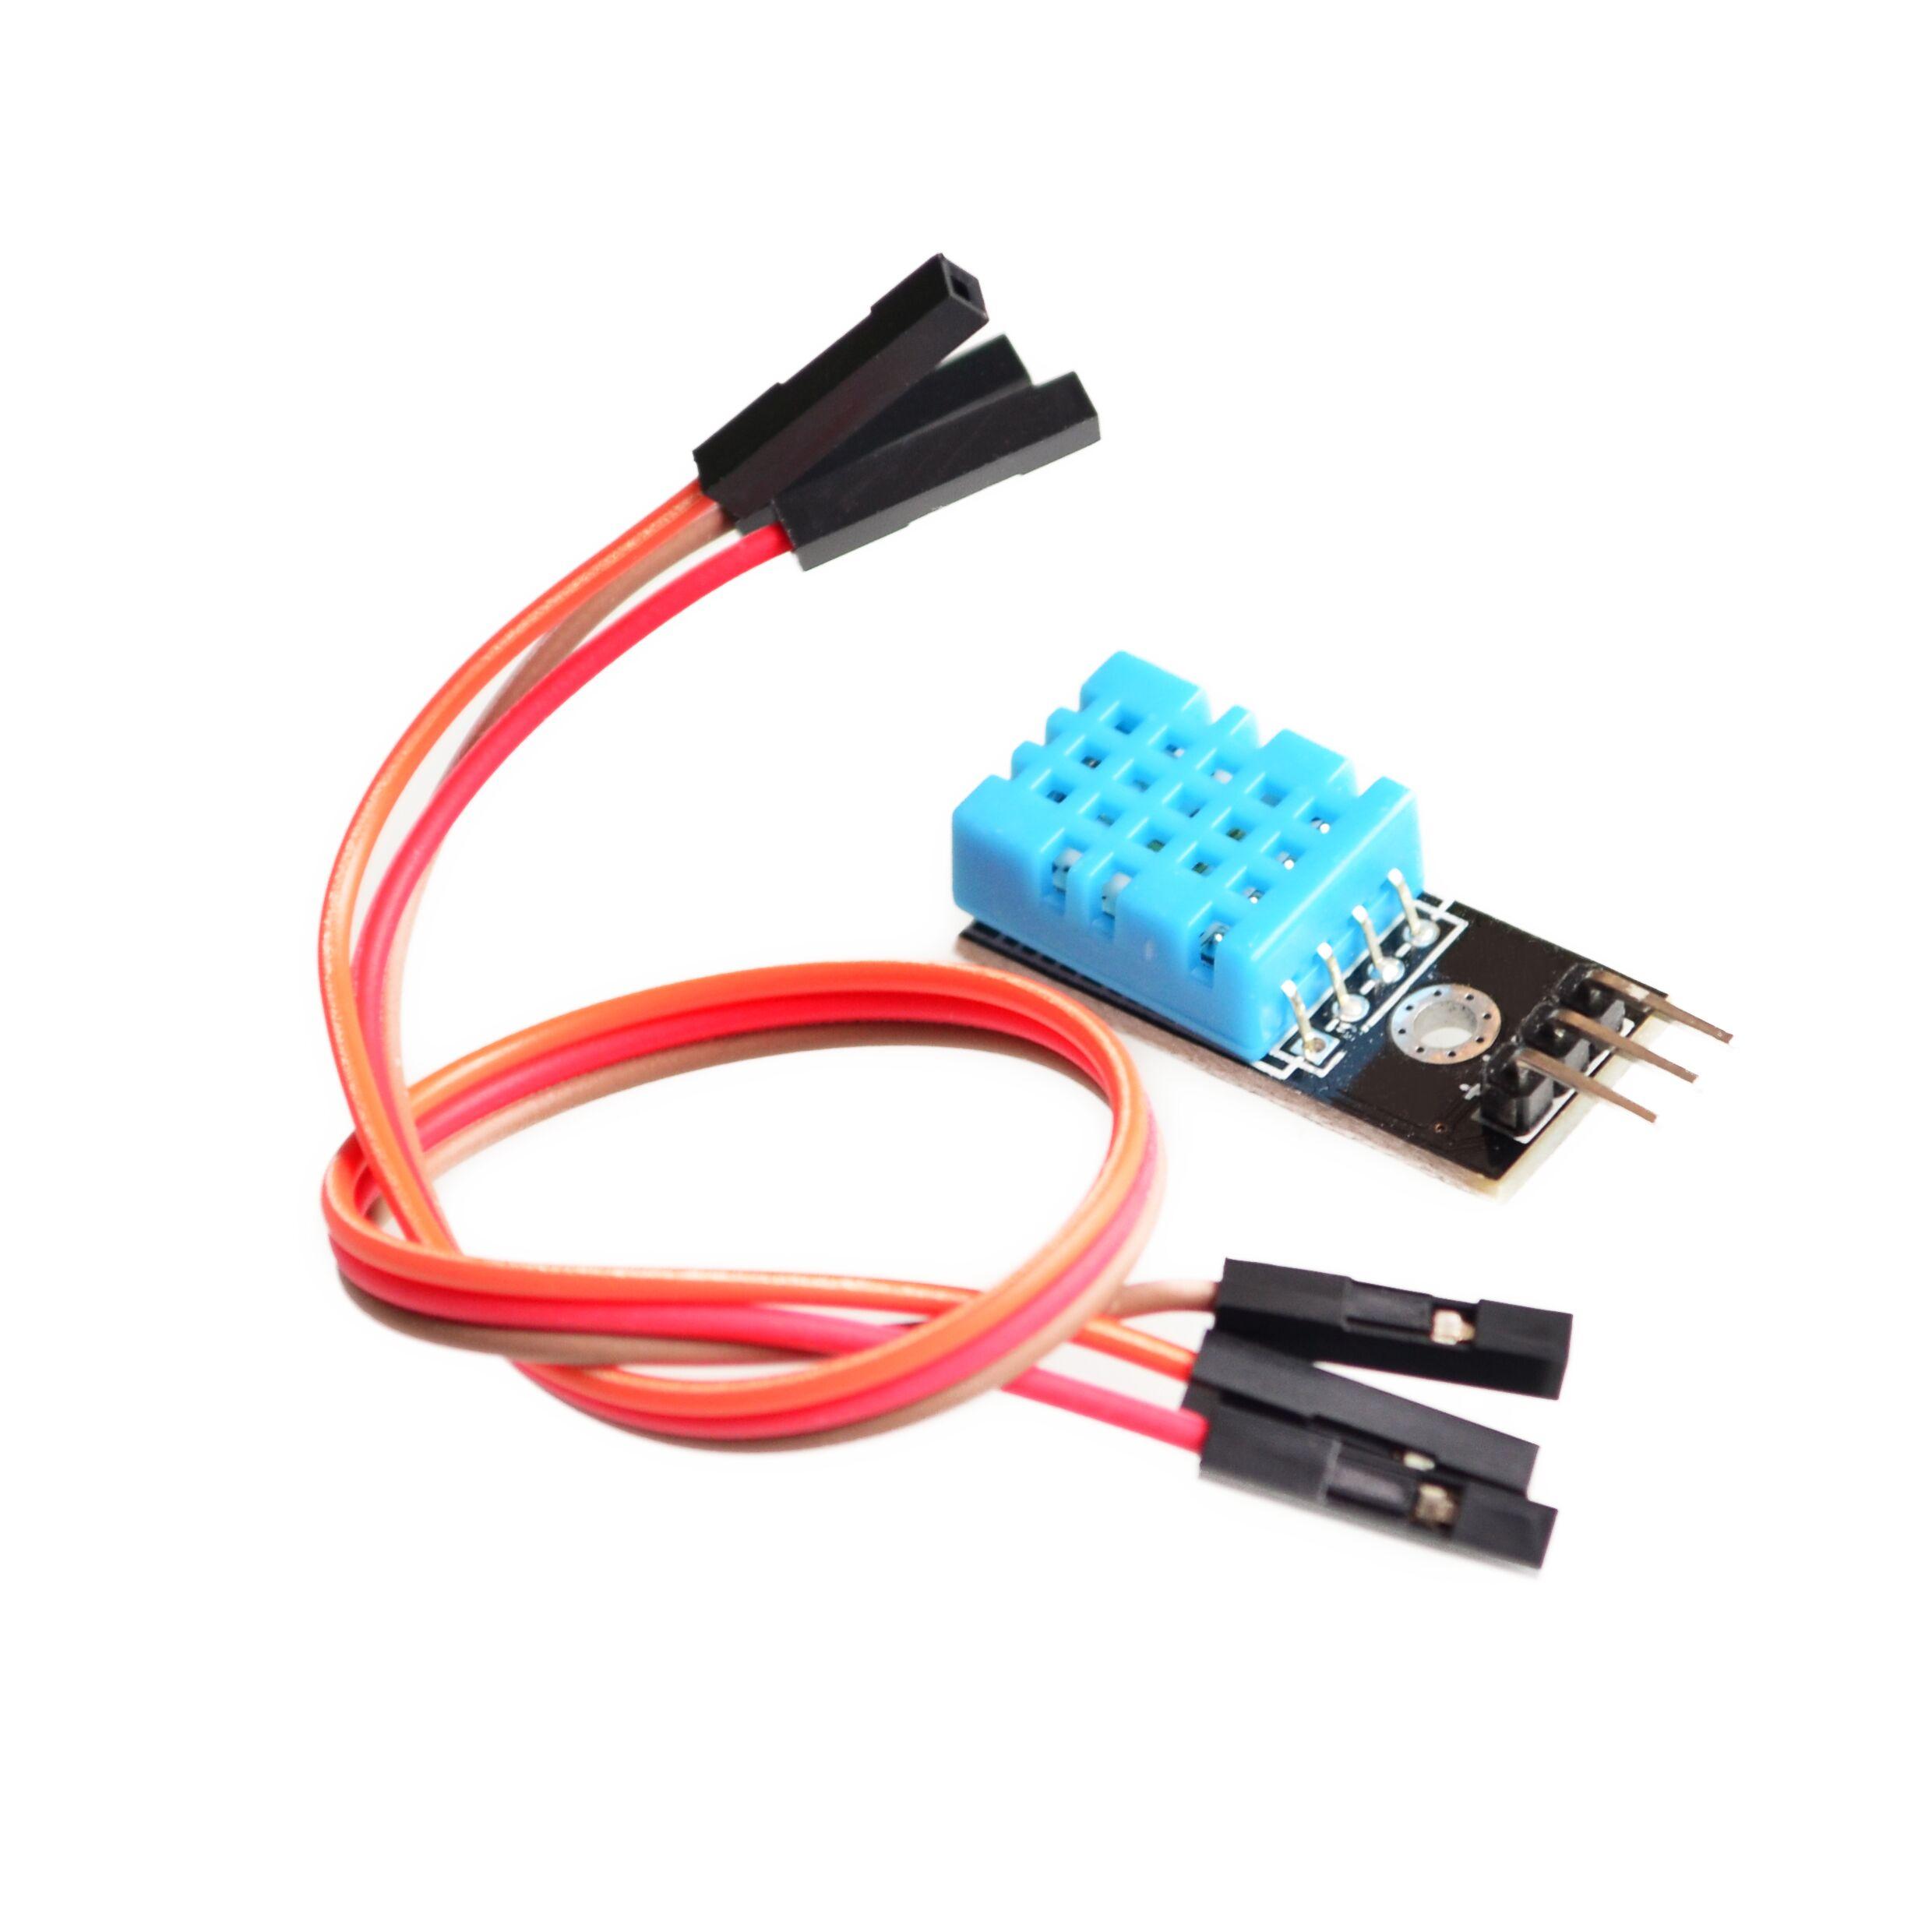 DHT11-Temperature-and-Relative-Humidity-Sensor-Module-With-Cable